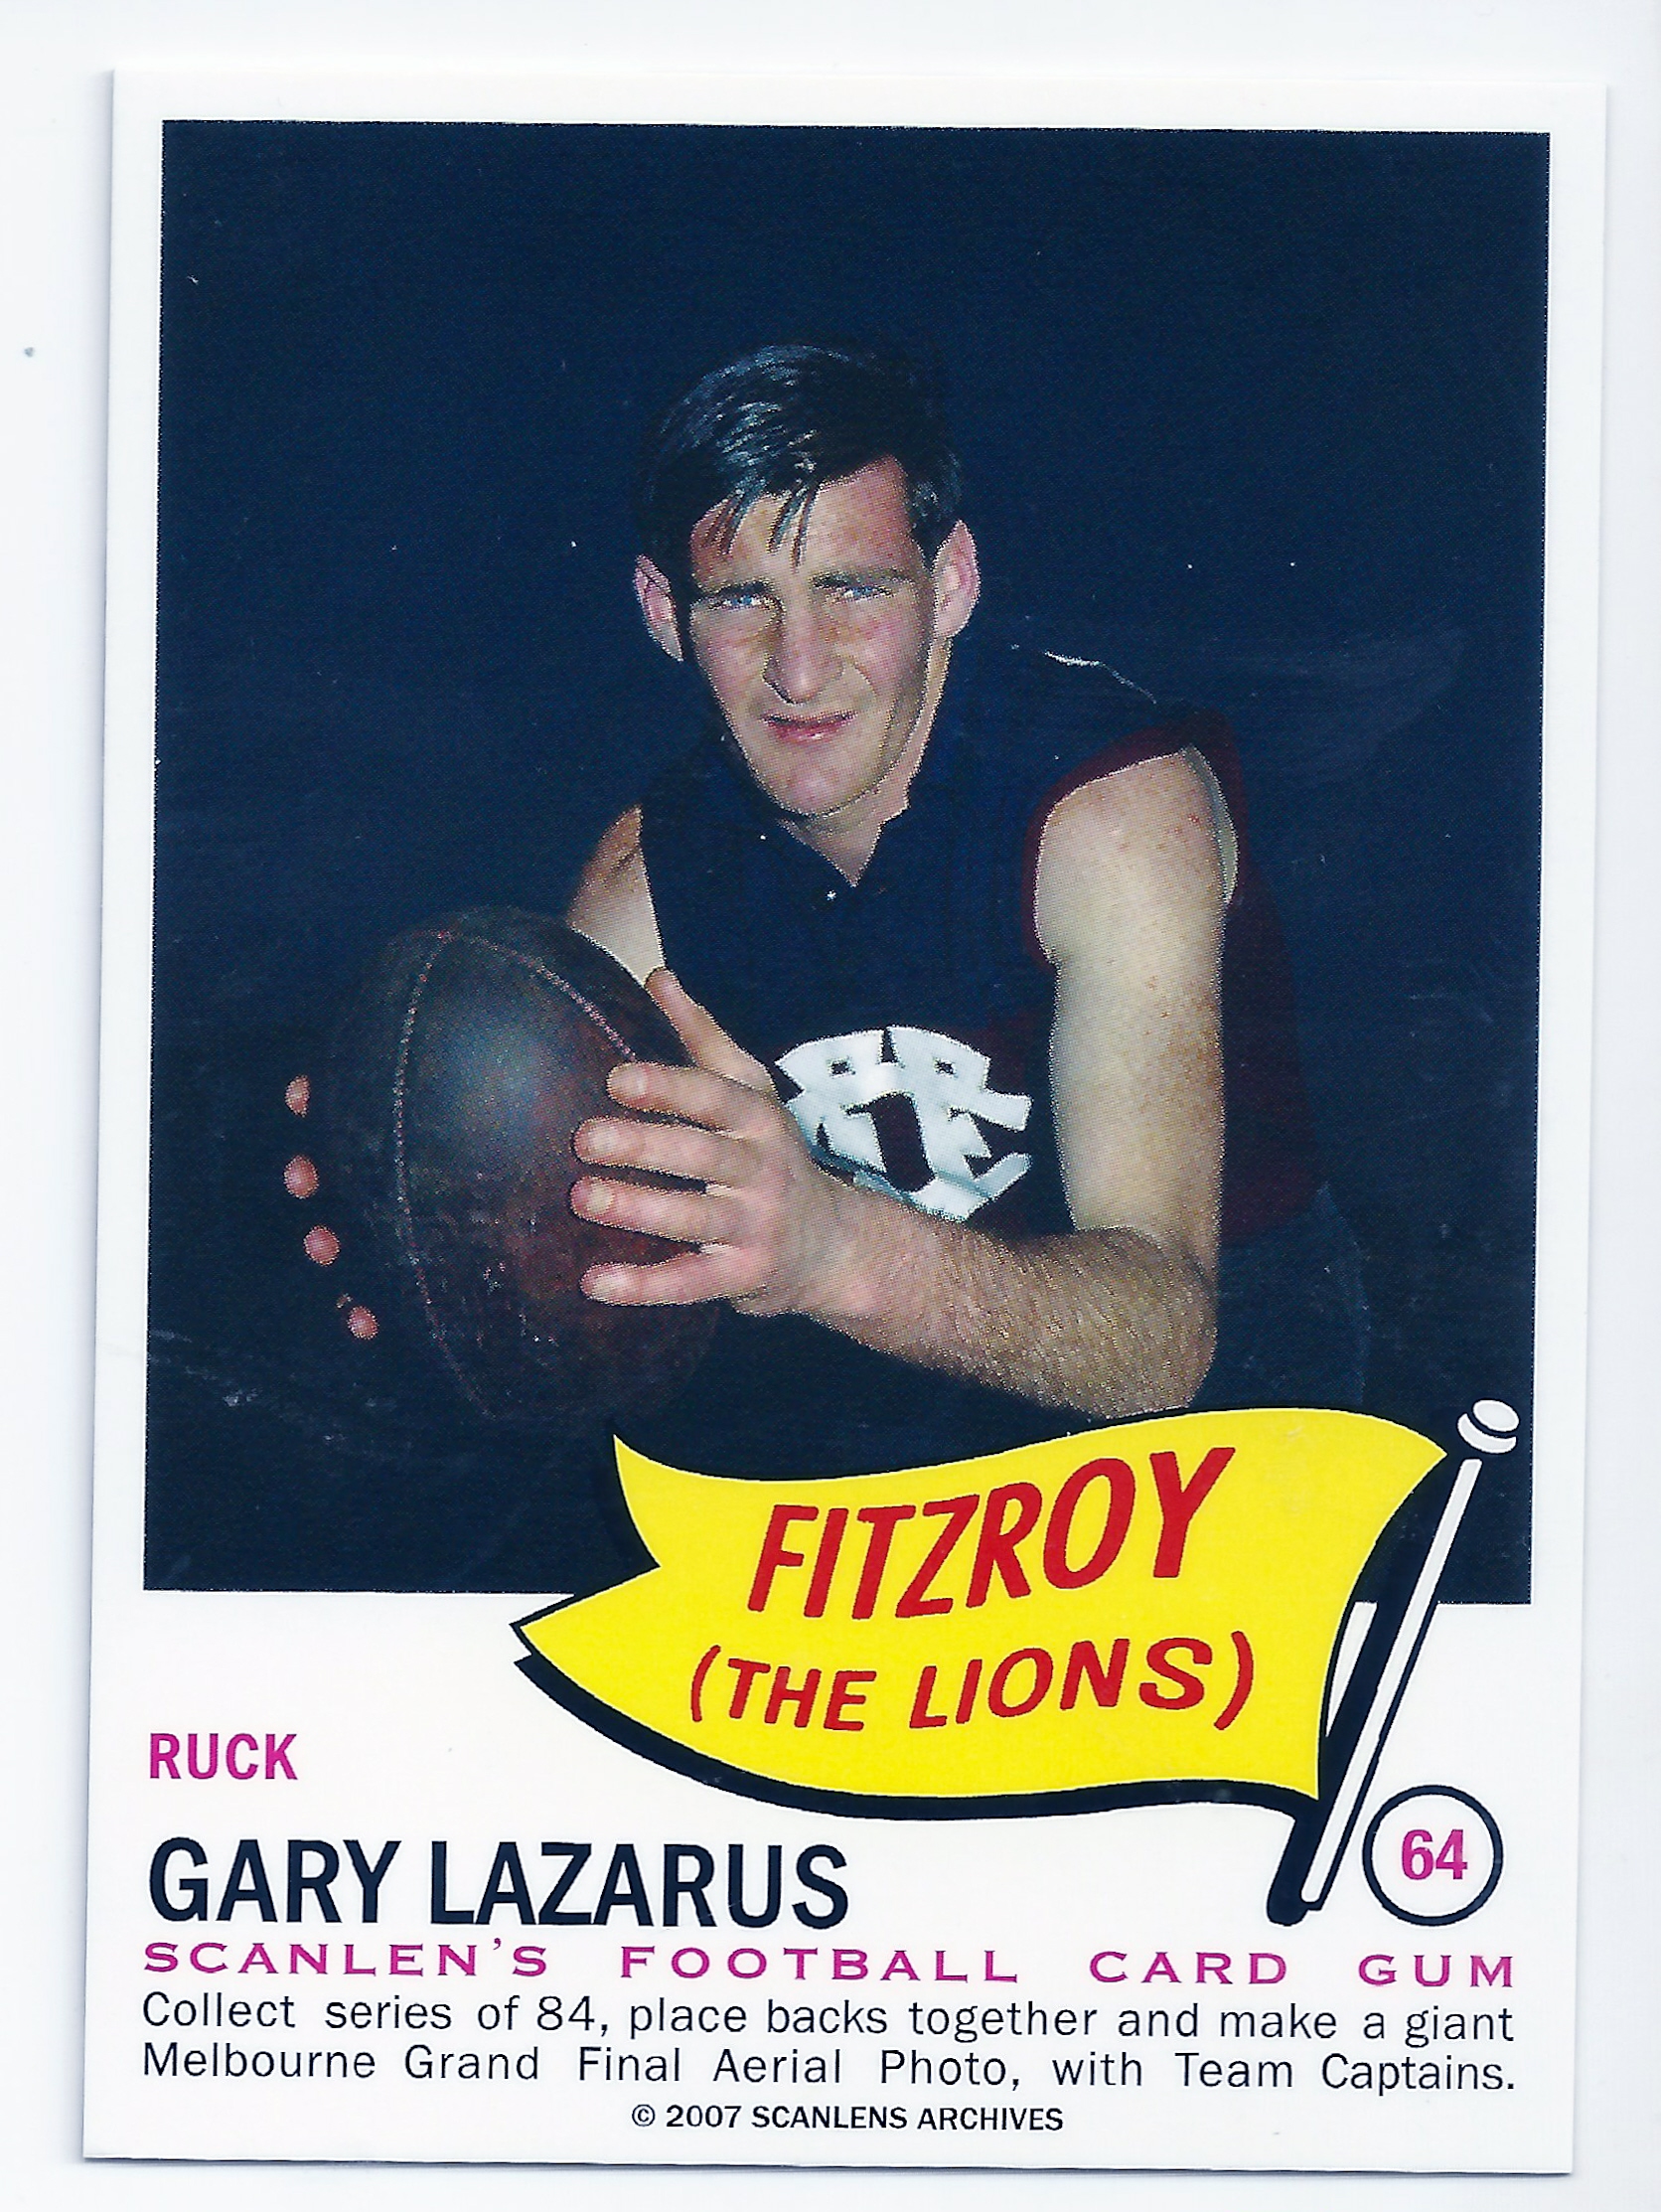 2007 – 1966 Scanlens Flag Archives (64) Gary Lazarus Fitzroy